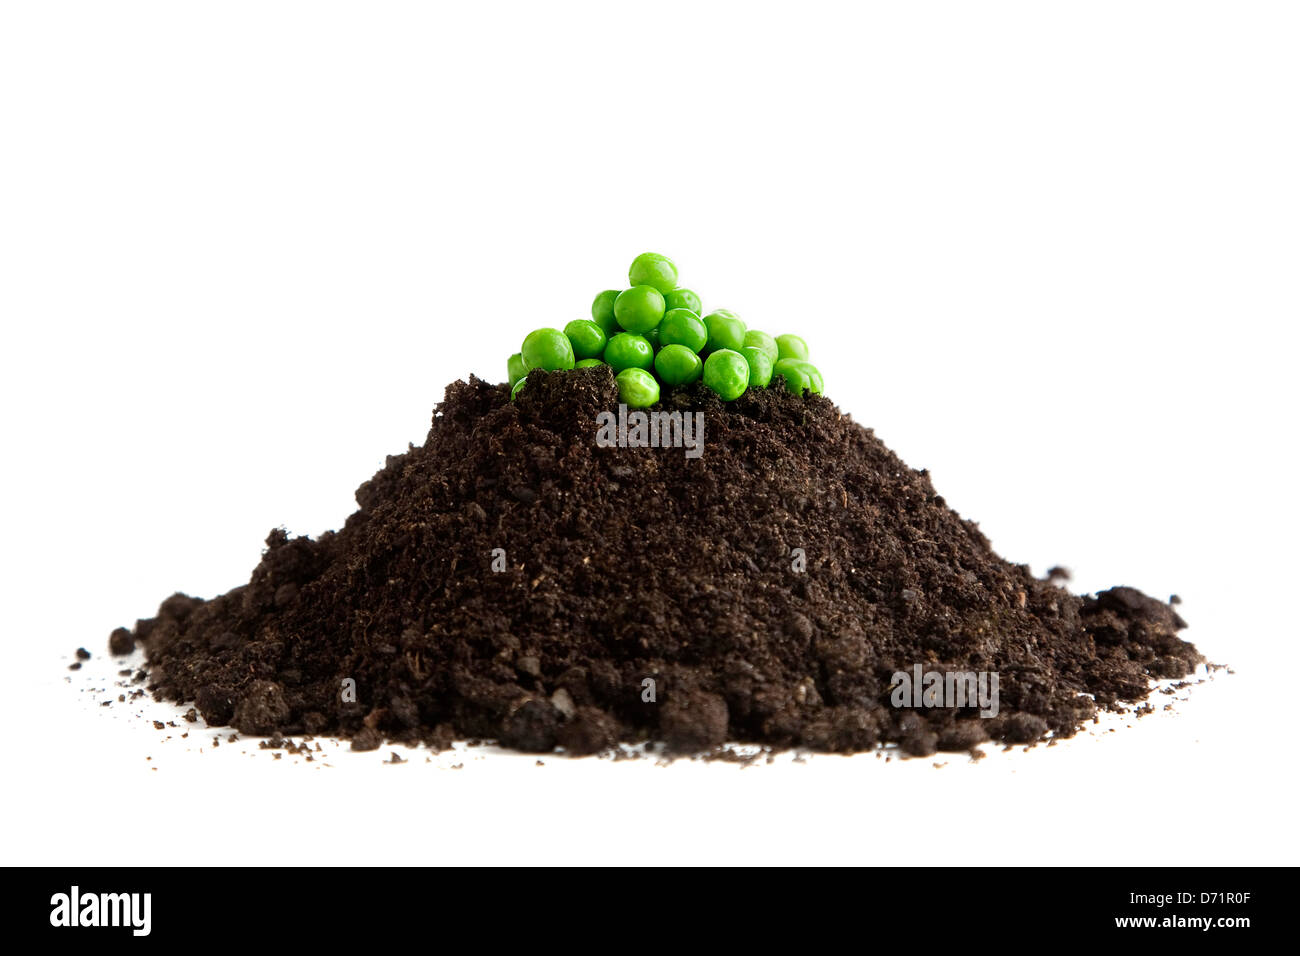 Green peas on pile of earth shot against white background; visual pun for Christmas card - Peace on Earth Stock Photo